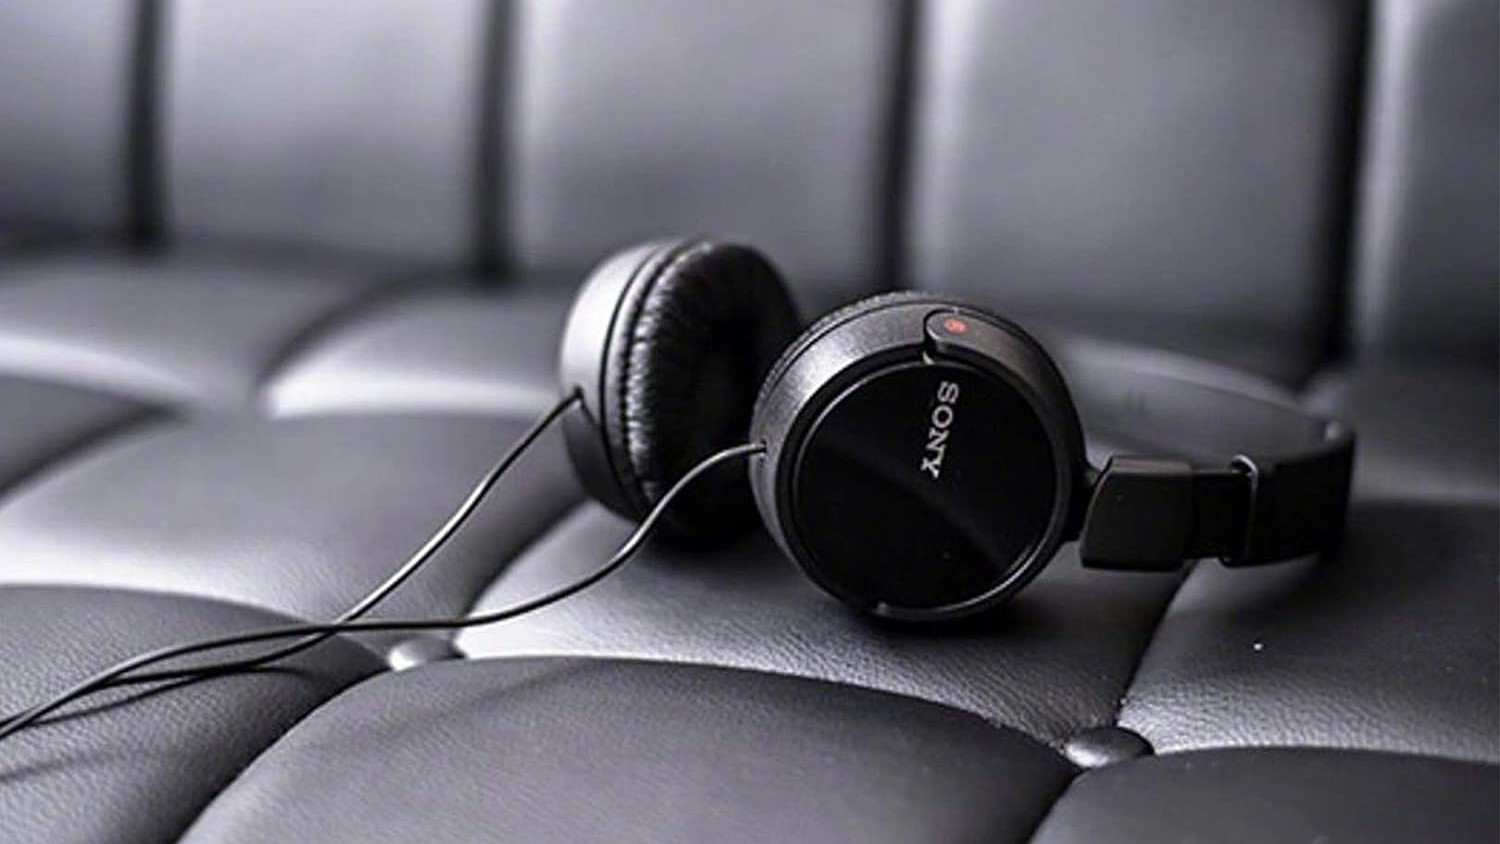 sony headphones laying on the couch